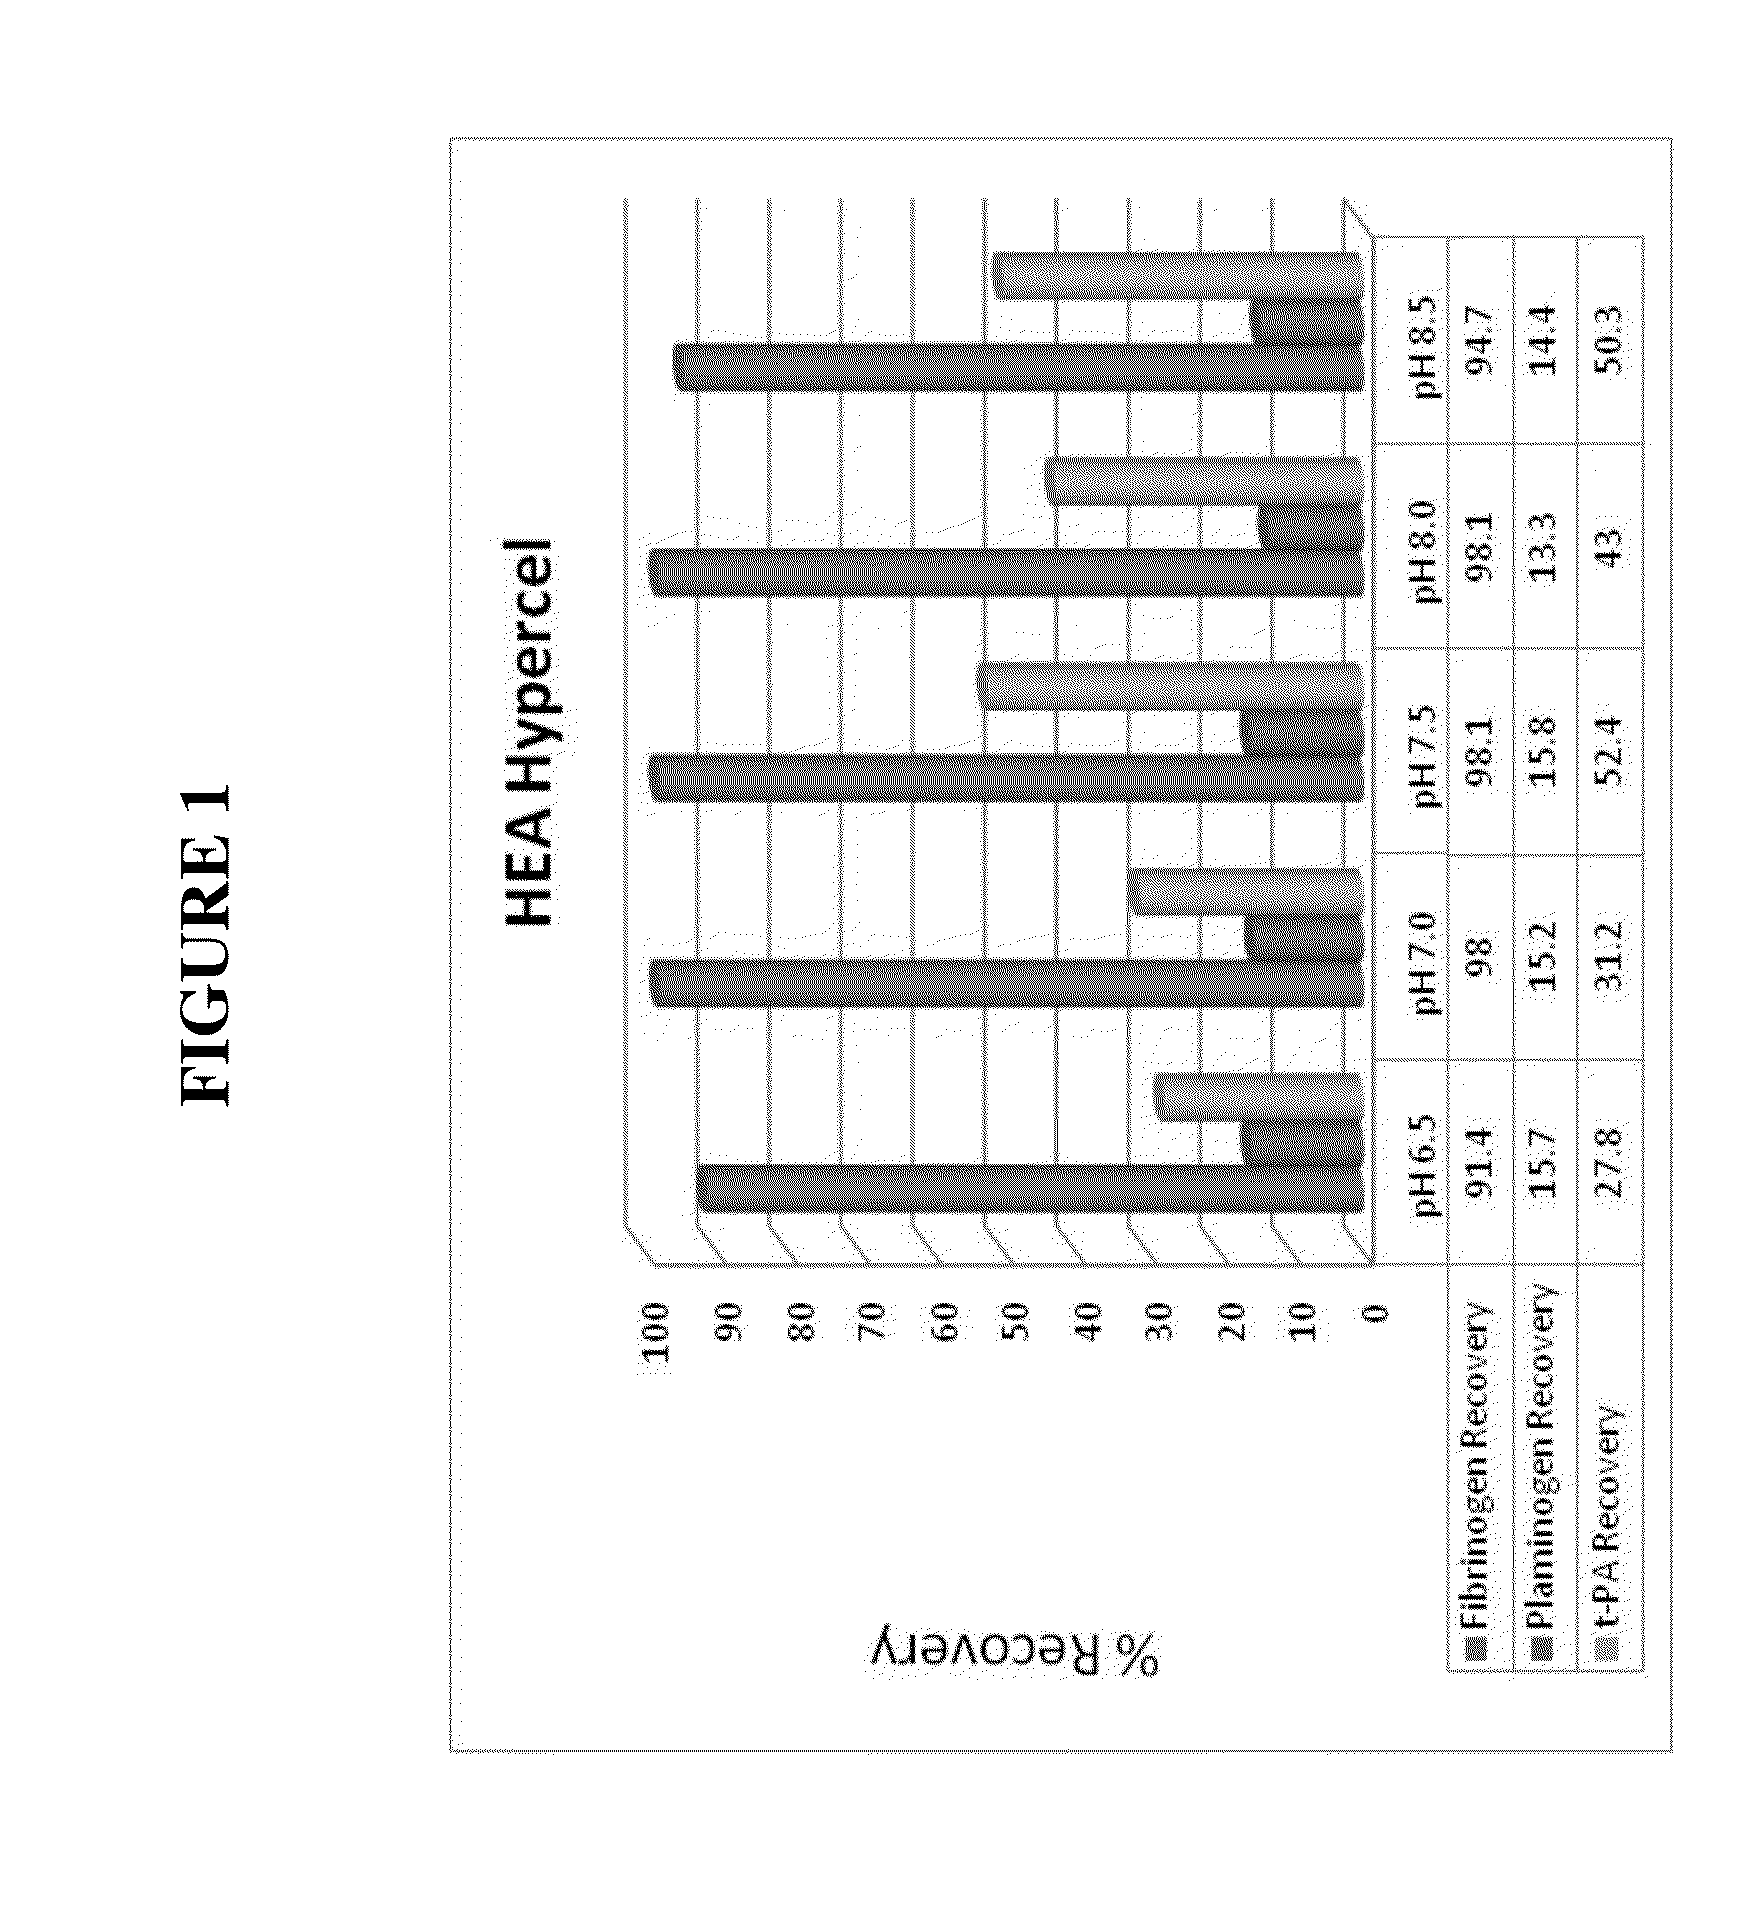 Method of purifying therapeutic proteins